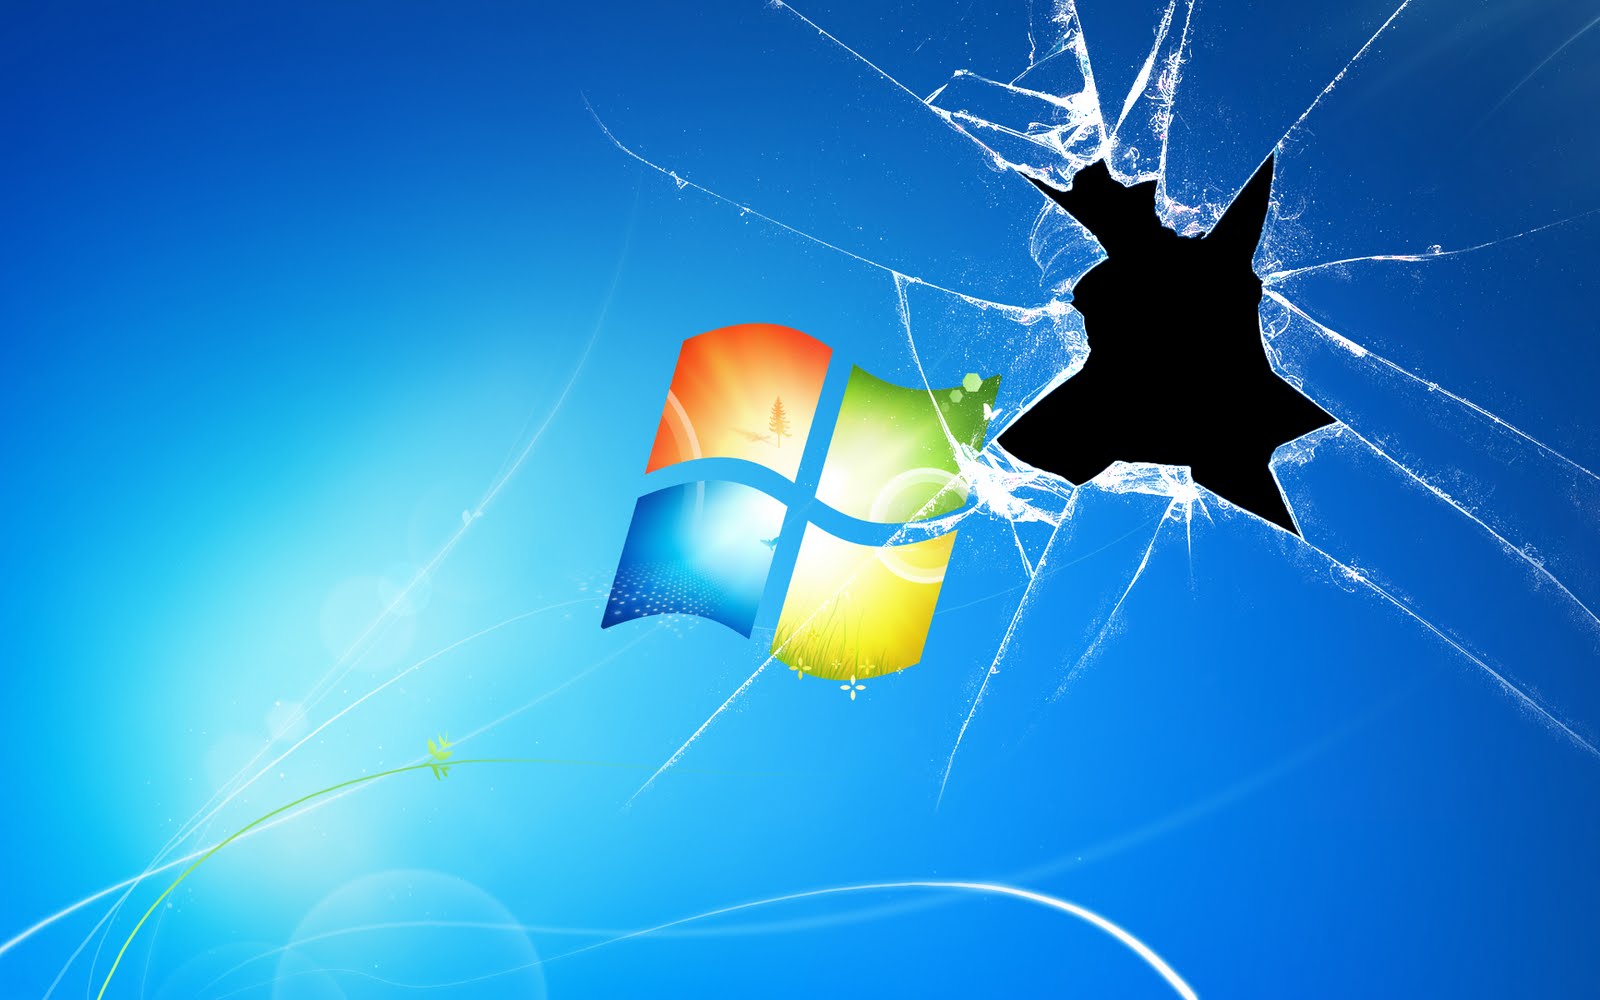 Broken Windows 7 hd wallpaper 1920x1200 100 out of 10 based on 1